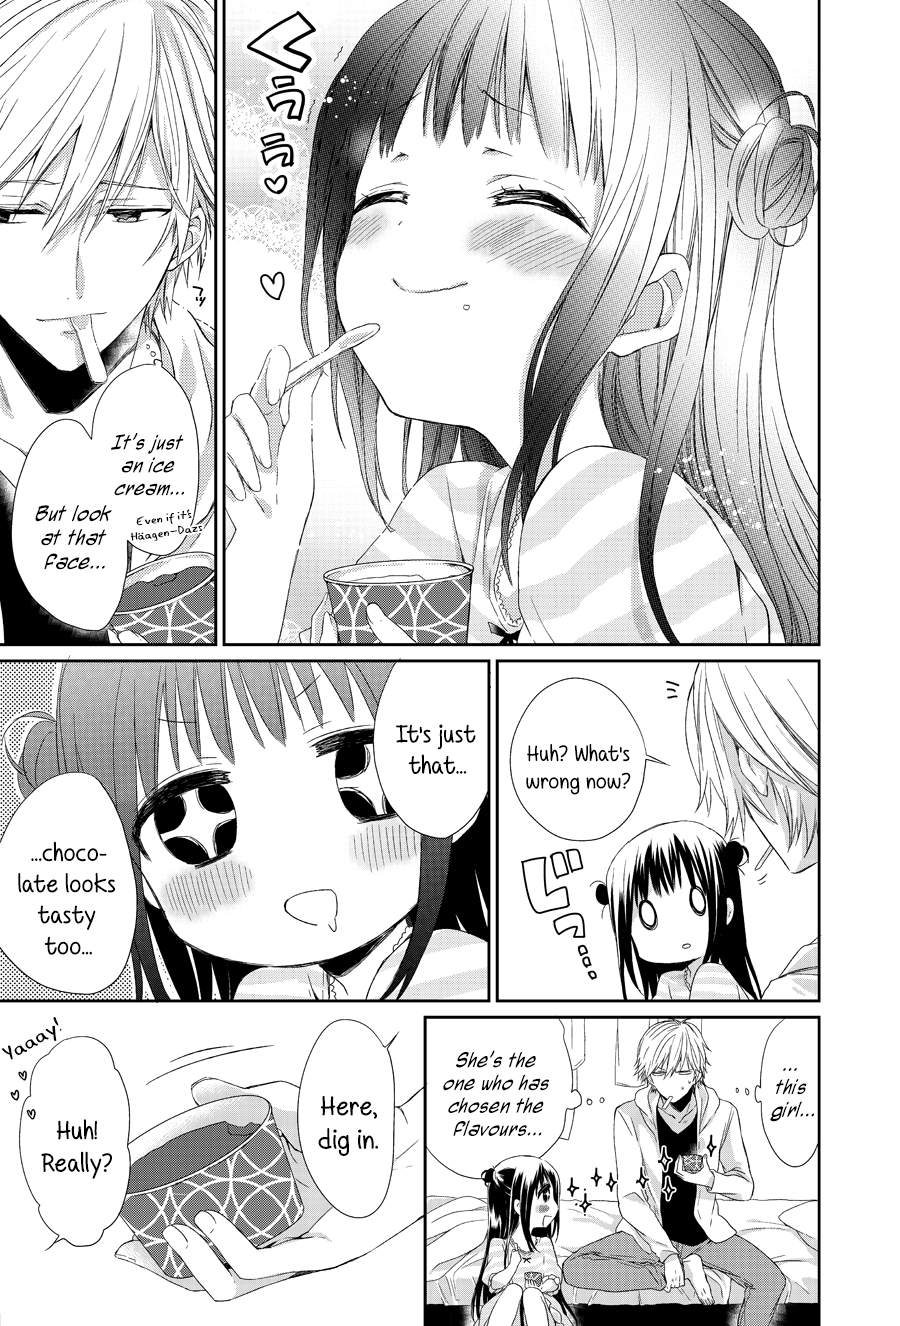 She's Not My Girlfriend! We're Just Childhood Friends - Page 4